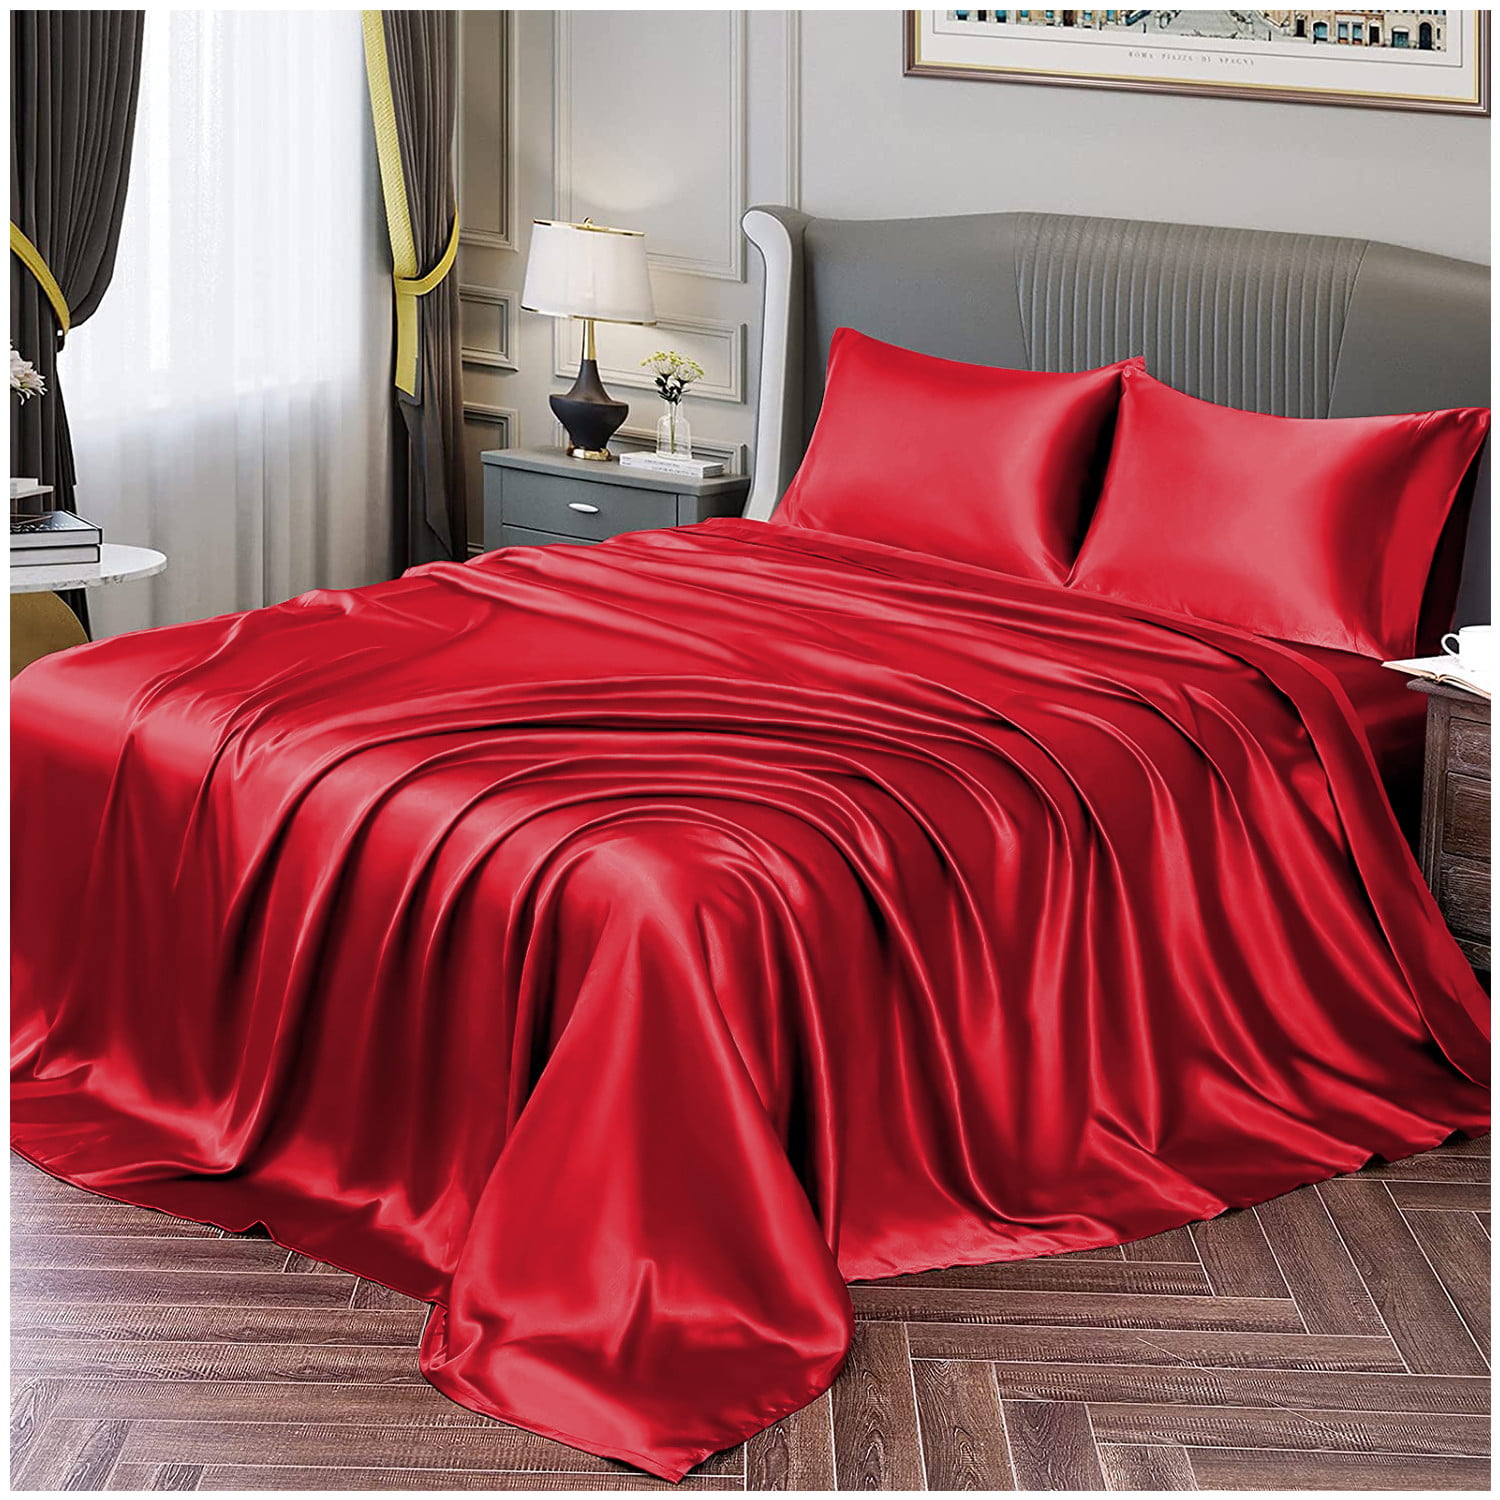 Stain Resistant Hotel Luxury Silky Bed Sheets Fade Pillow Cases Satin Sheets King 4-Piece, Burgundy Wrinkle Deep Pocket Fitted Sheet Flat Sheet Extra Soft 1800 Microfiber Sheet Set 